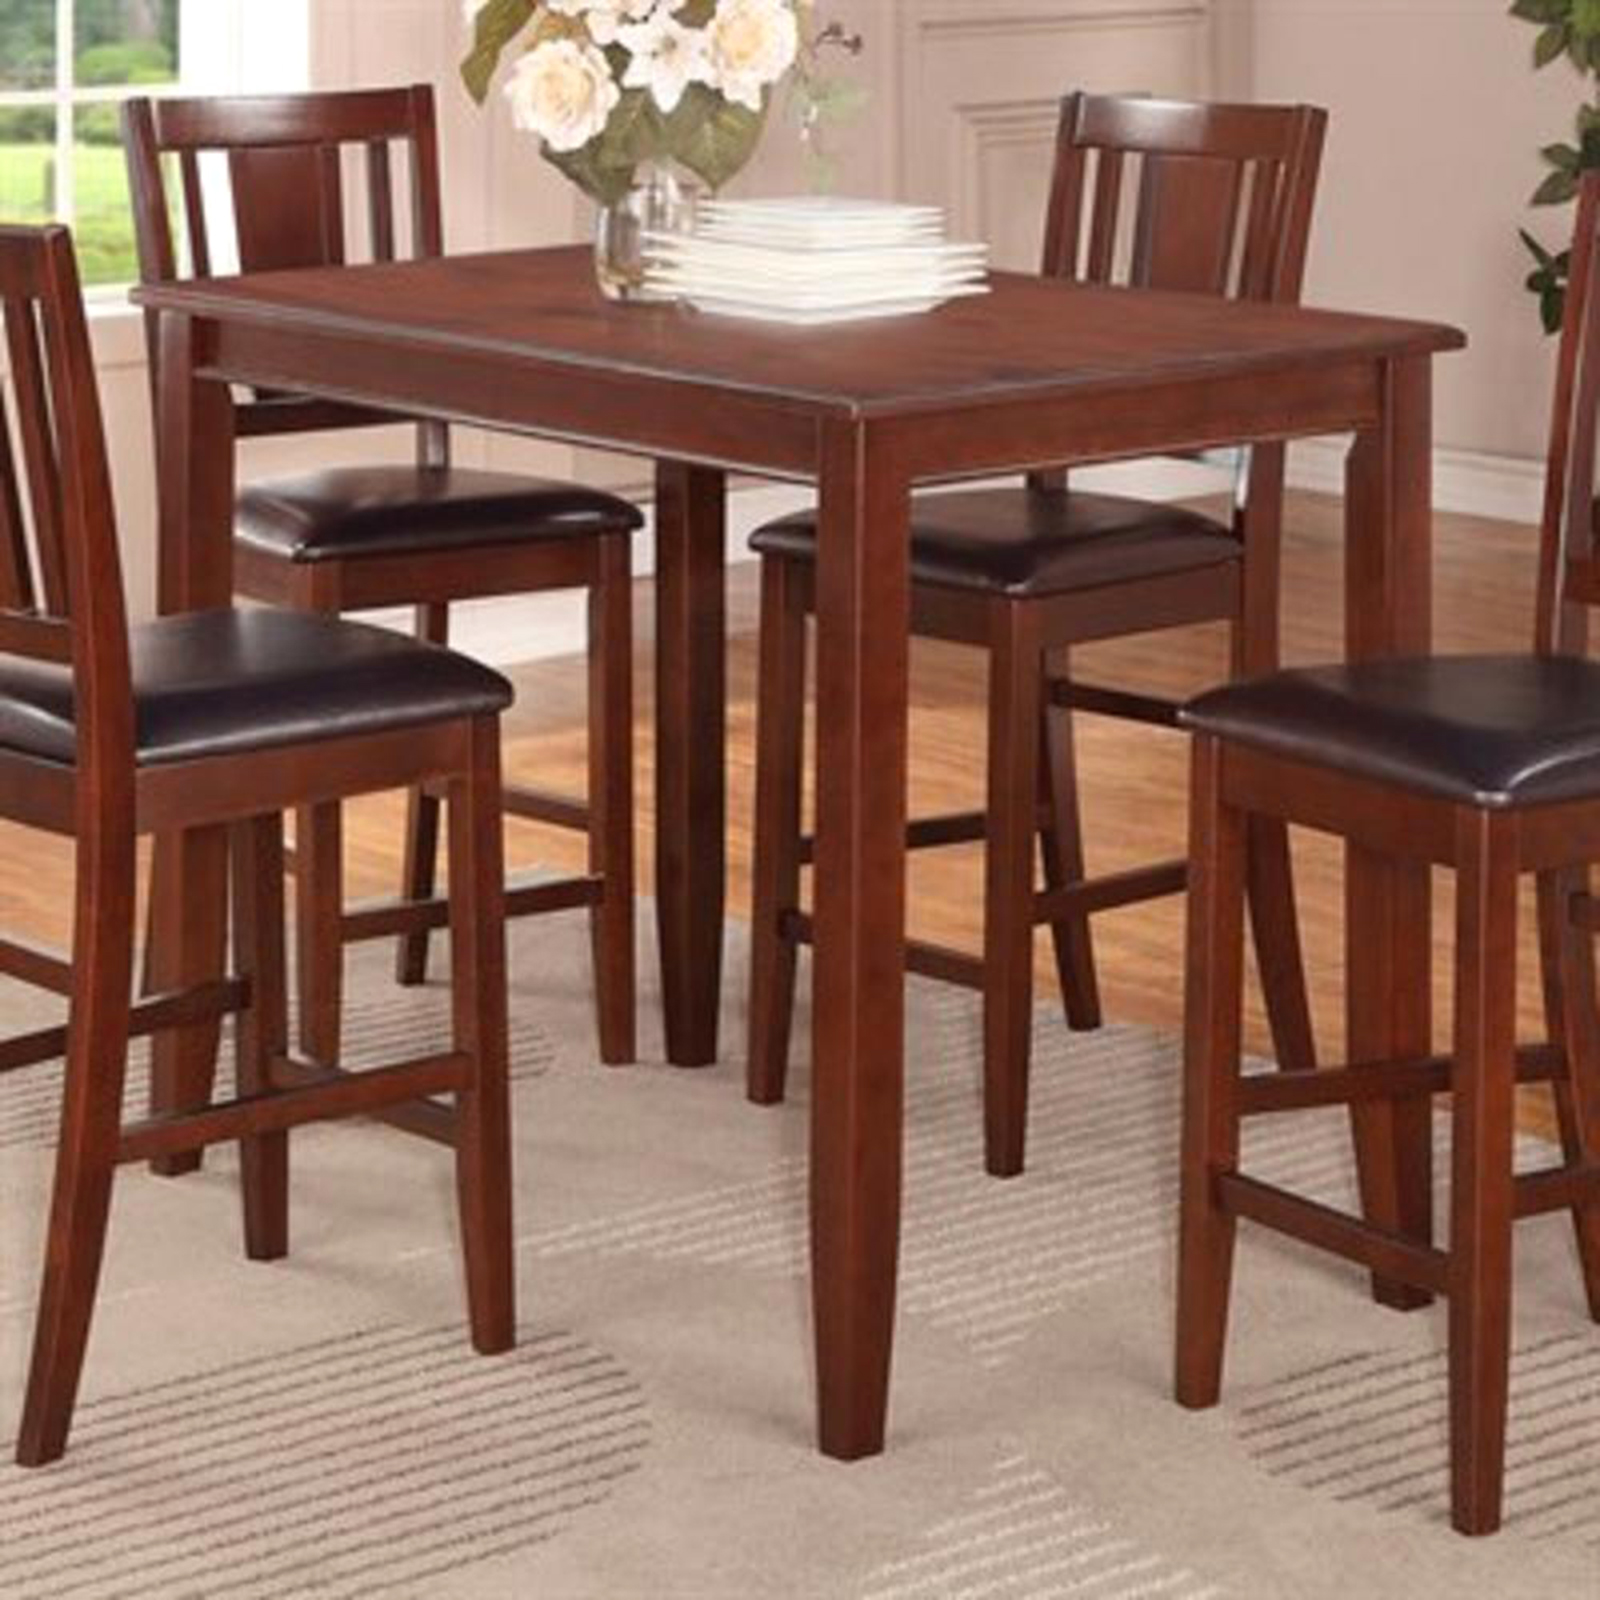 East West Furniture Buckland Counter Height Dining Table - Mahogany